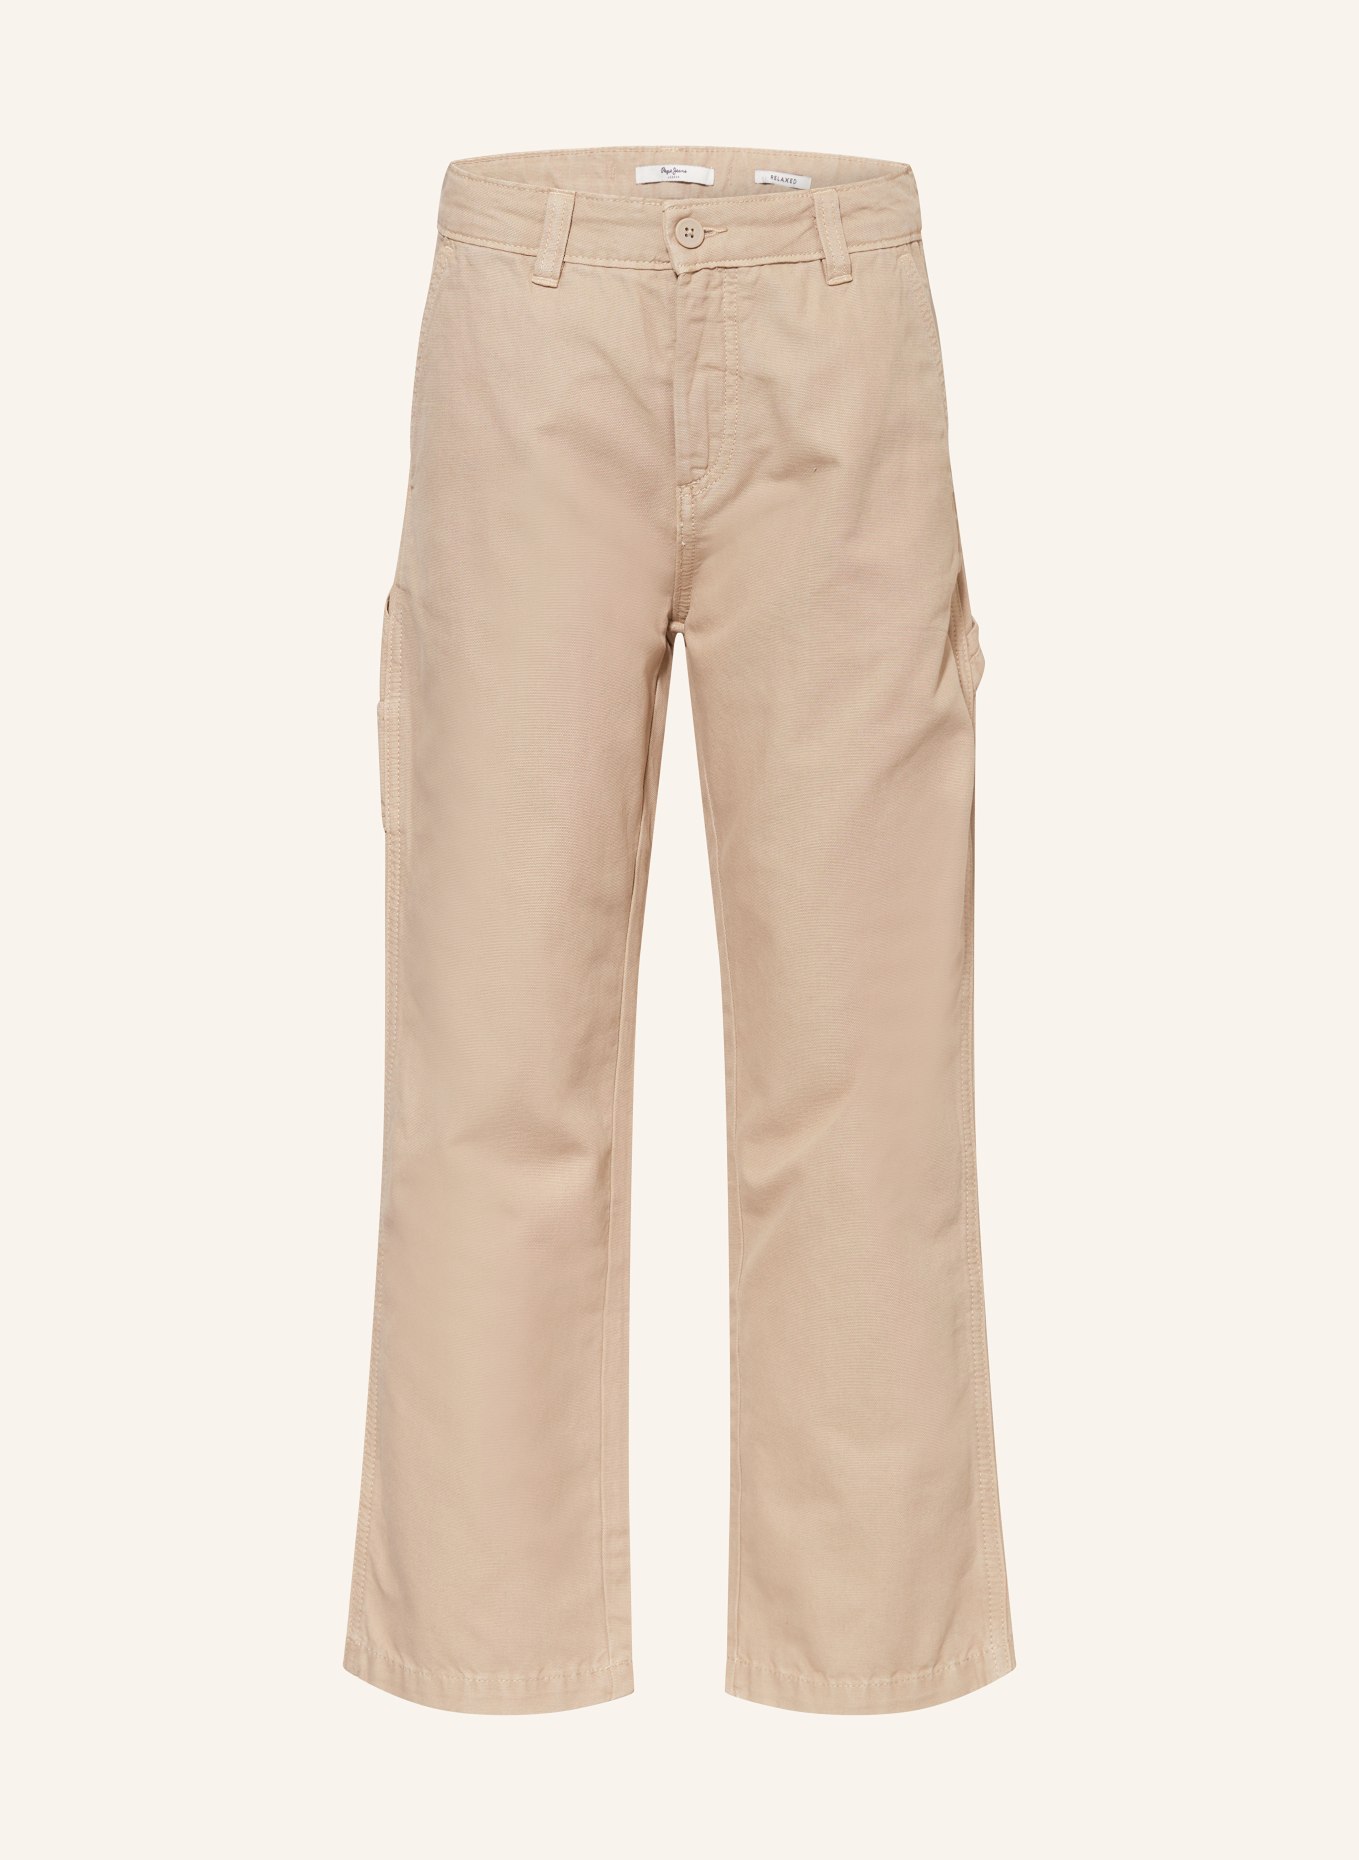 Pepe Jeans Hose WORKER Relaxed Fit, Farbe: BEIGE (Bild 1)